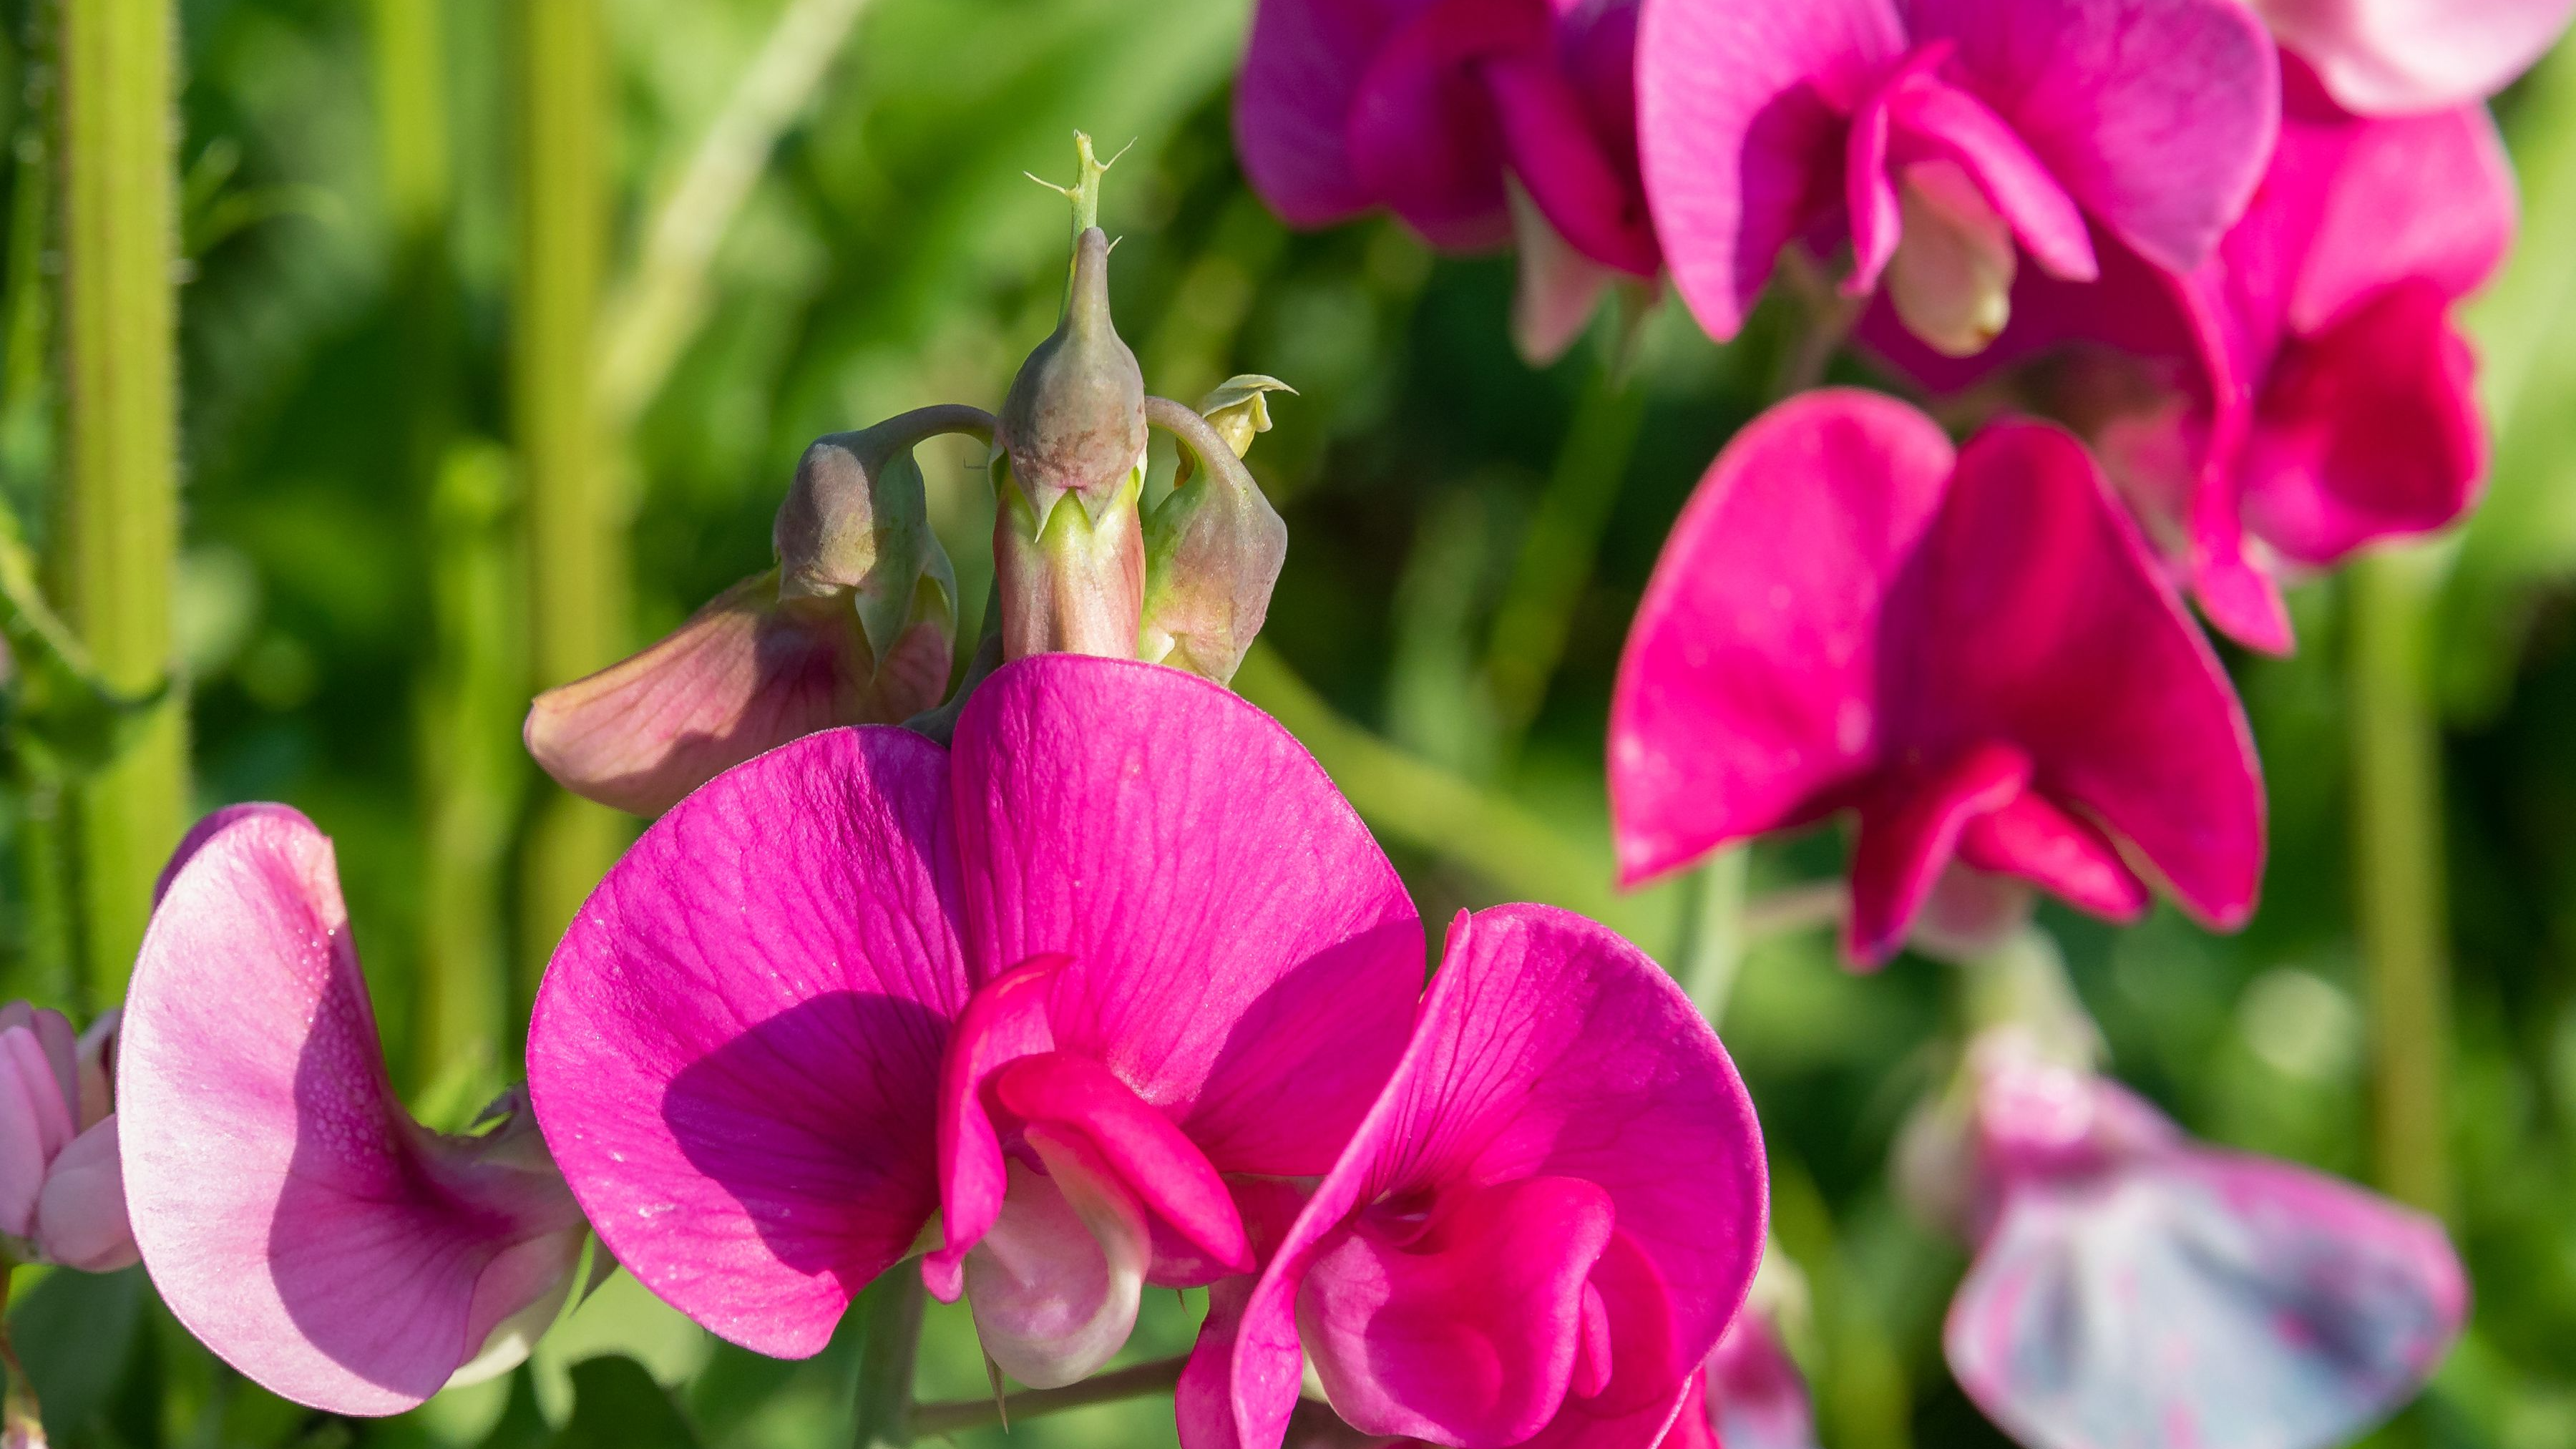 sweet-peas-the-queen-of-the-annuals-1402917-06-893caa2772ff4af6b02d7663b2a38763